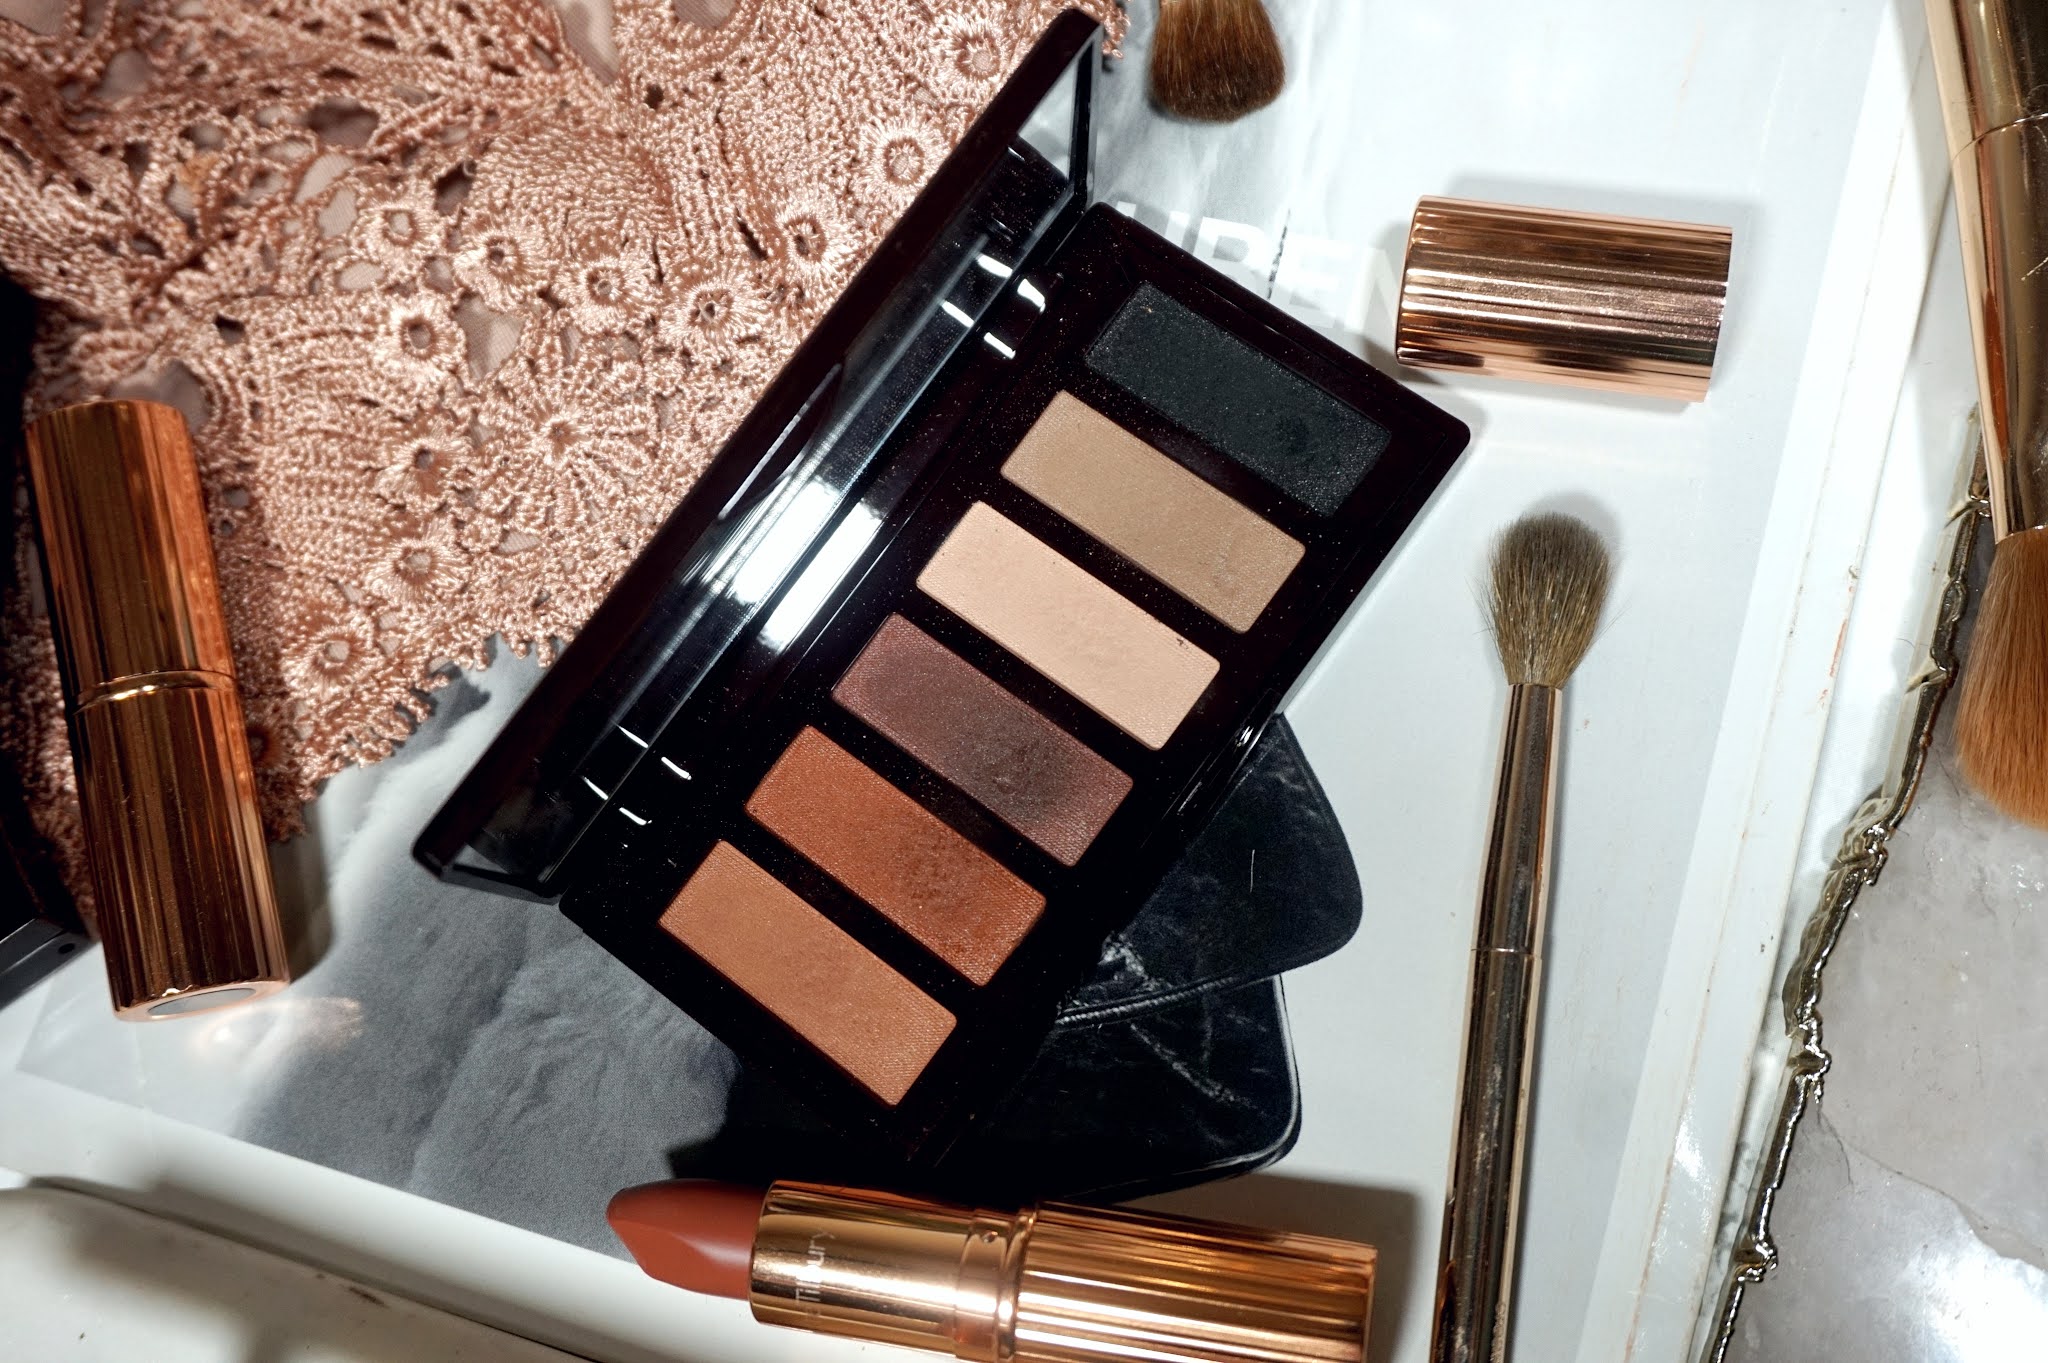 Charlotte Tilbury Super Nudes Easy Eyeshadow Palette Review and Swatches